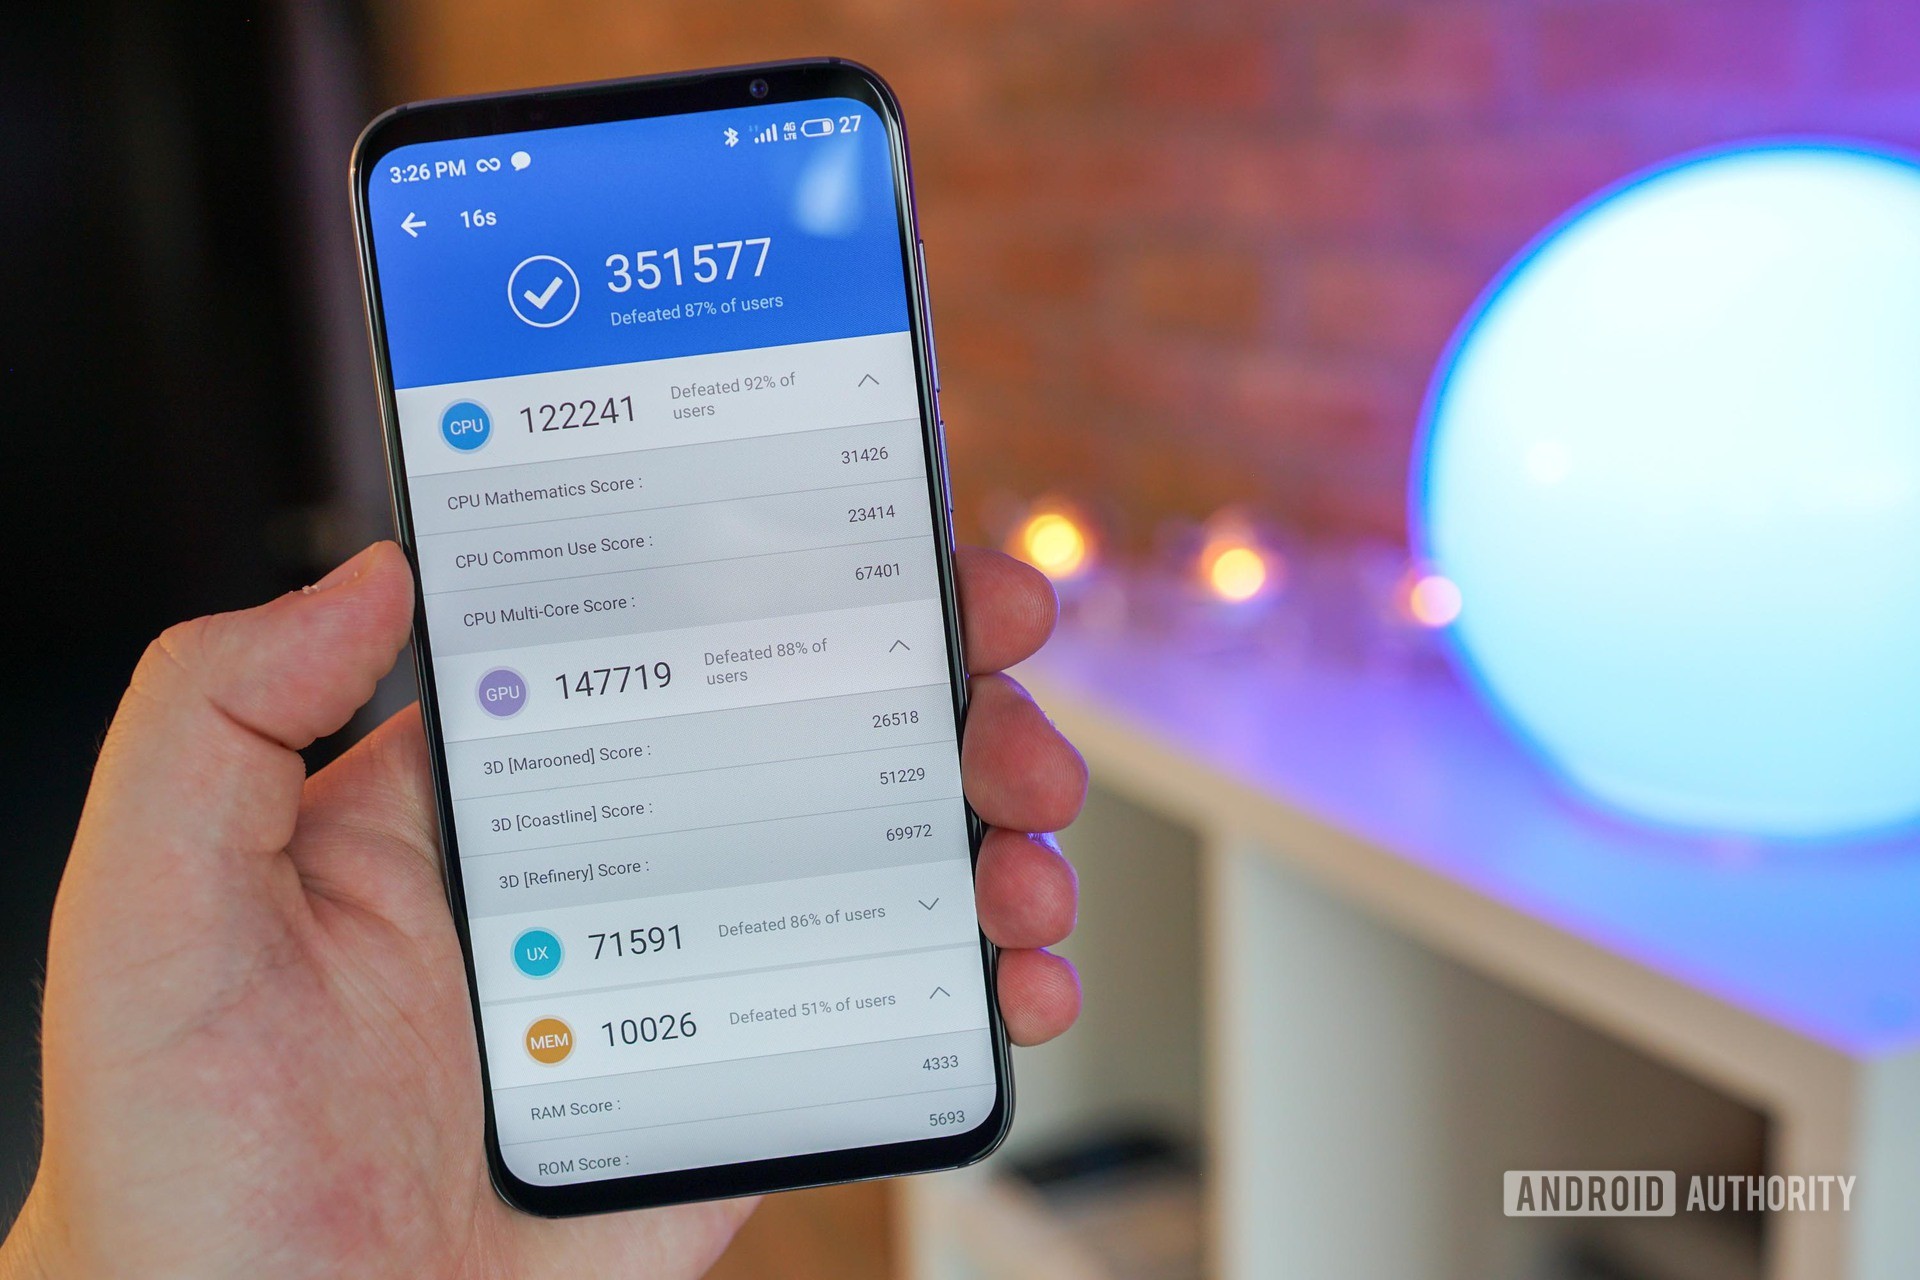 Meizu 16s Antutu benchmark result with overall score of 351,577